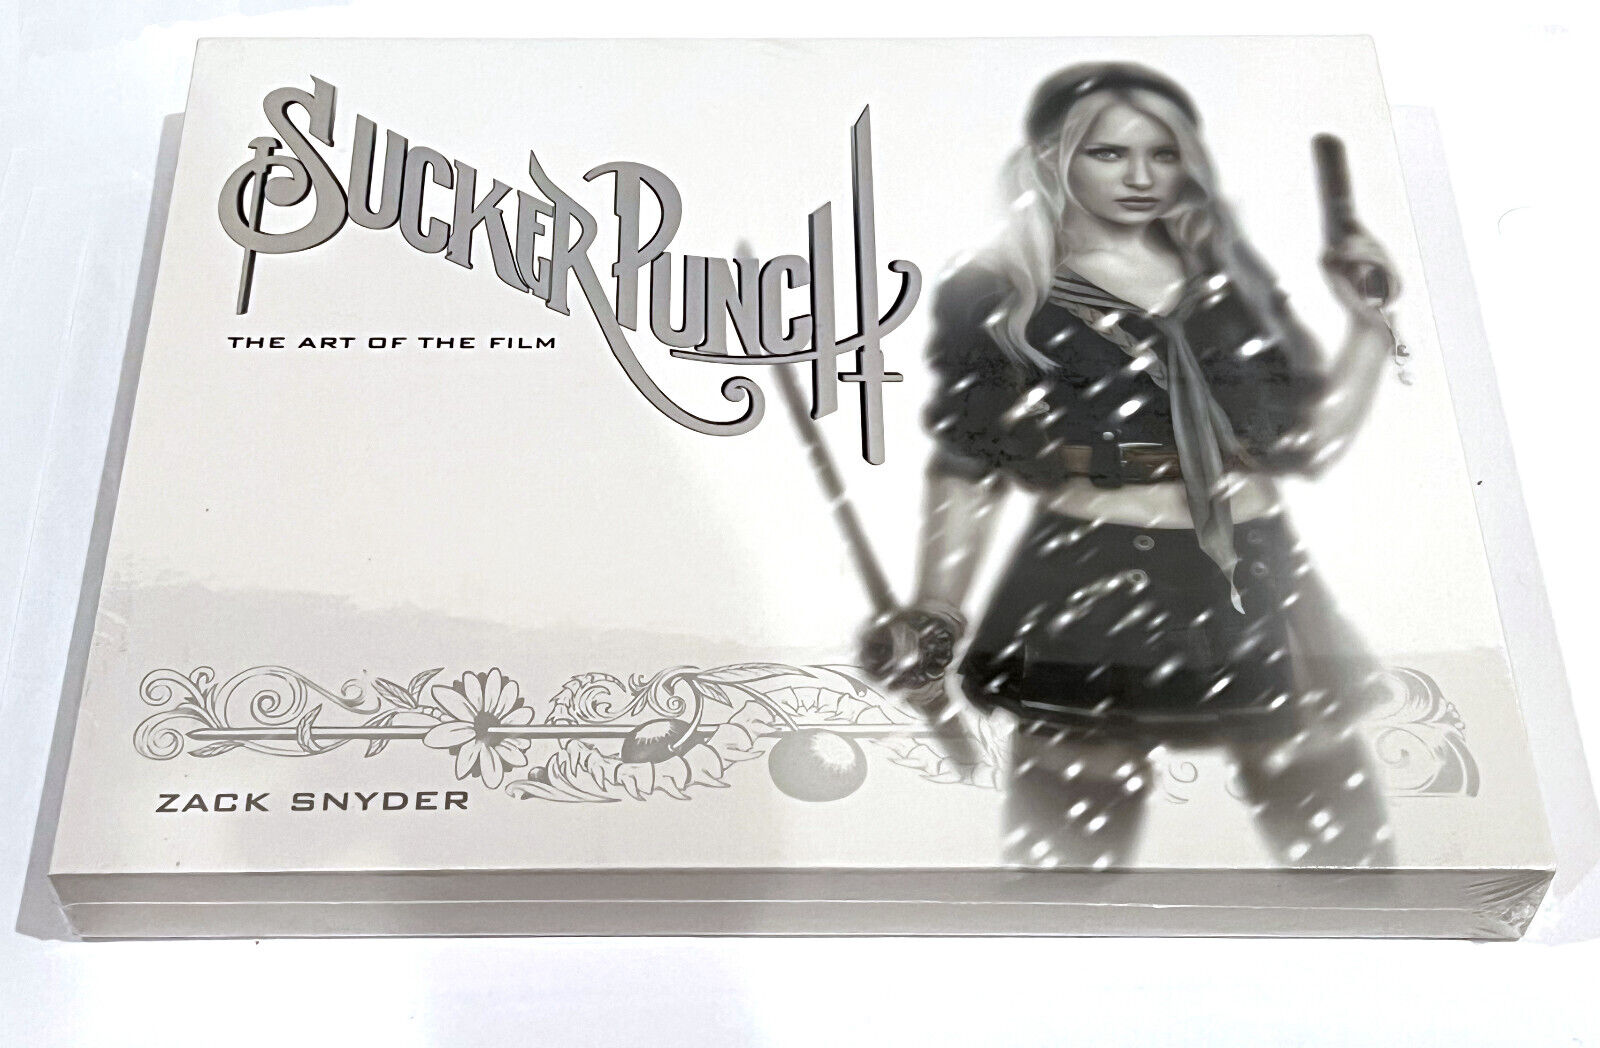 Sucker Punch Art Of The Film Zack Snyder Signed Autographed Ltd 750 Copies New